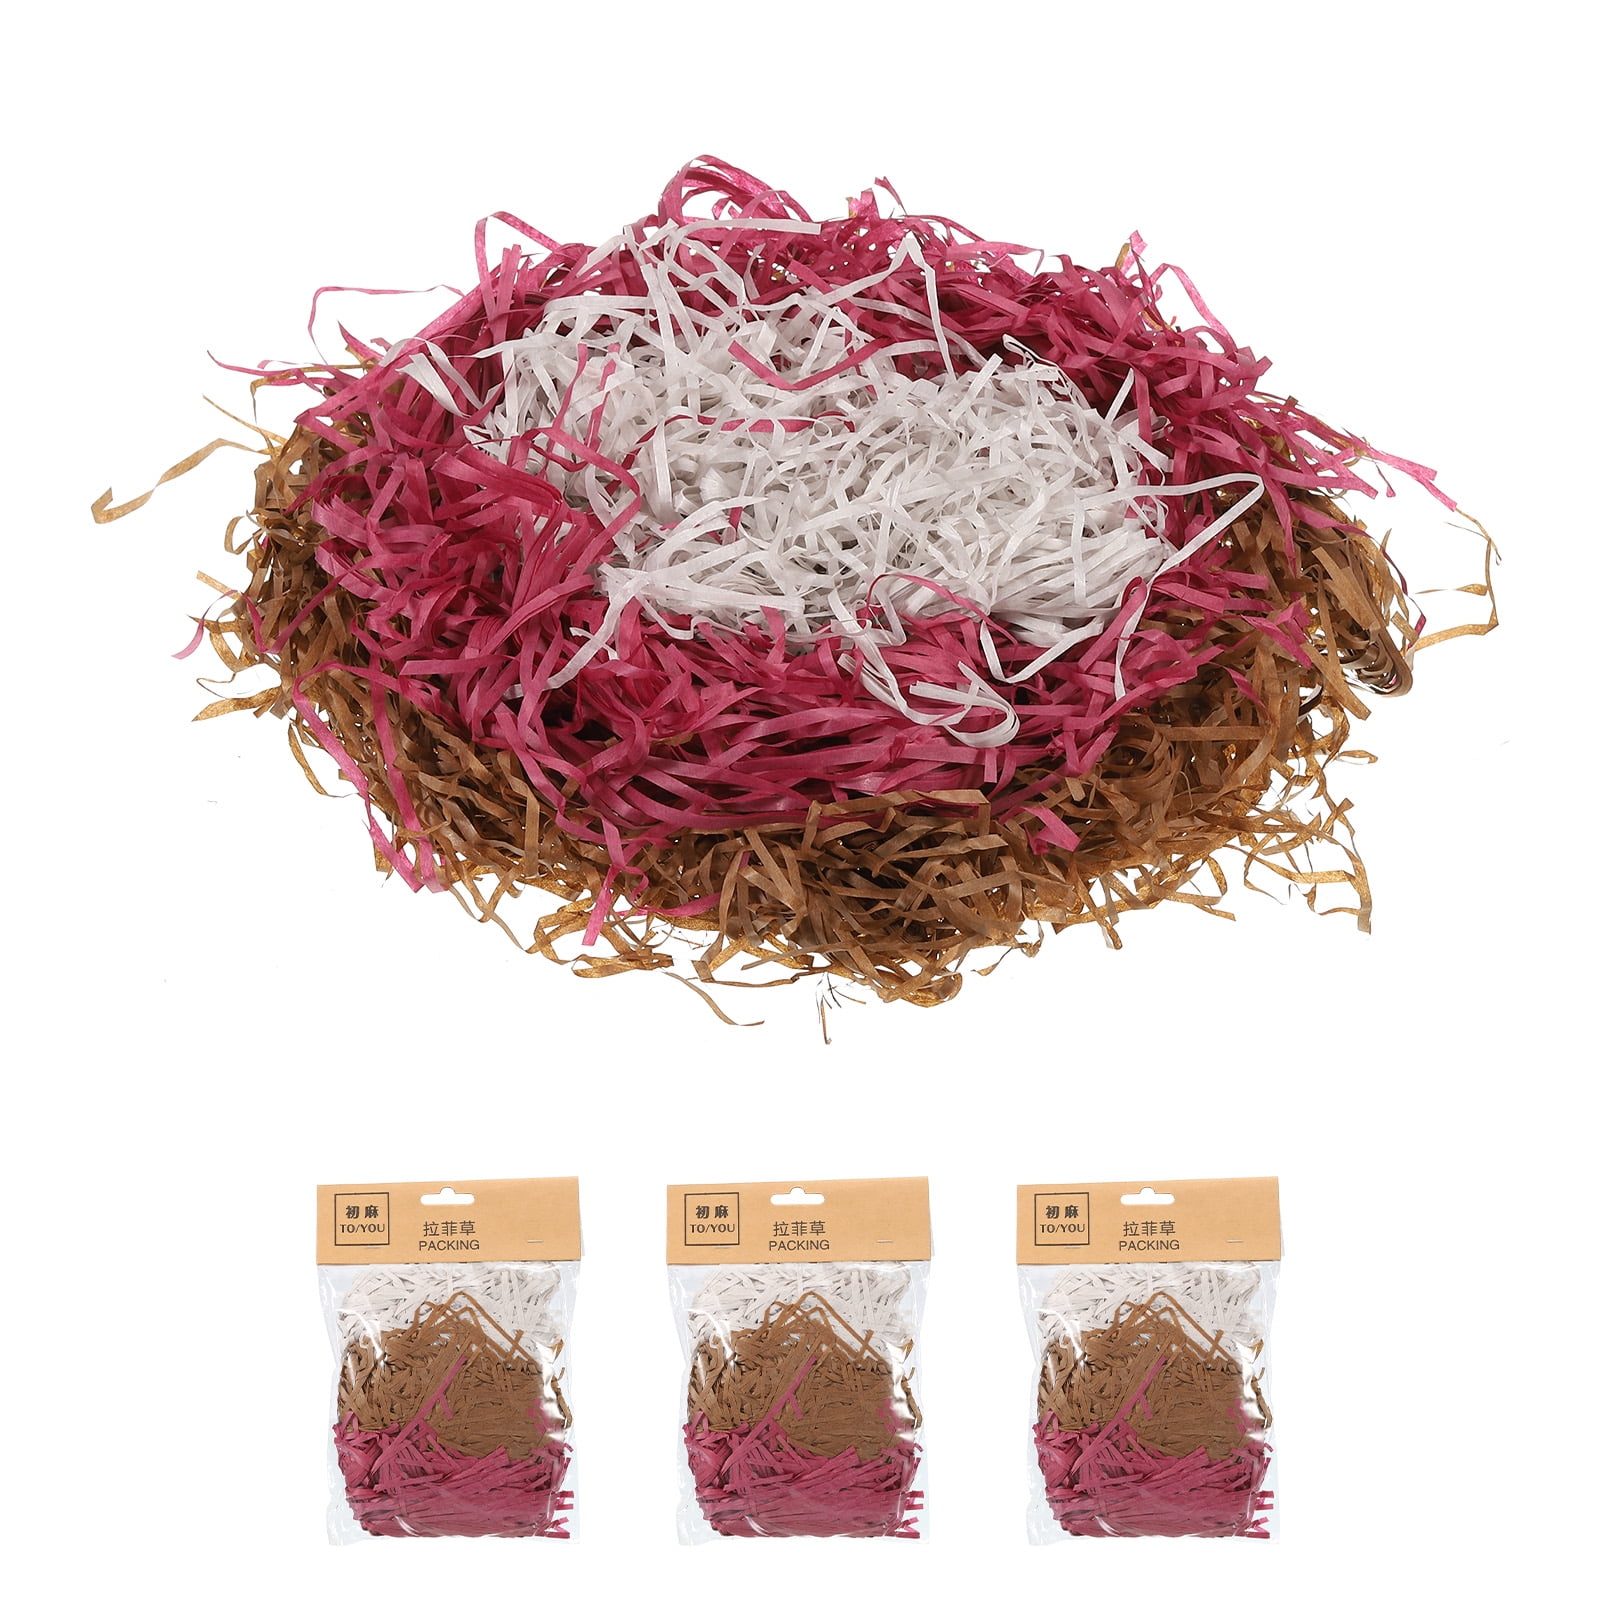 Uxcell Easter Grass Basket Filler Grass 3 Color (Brown,Burgundy,Blue)  Raffia Recyclable Paper for Gift Packaging 3 Pack